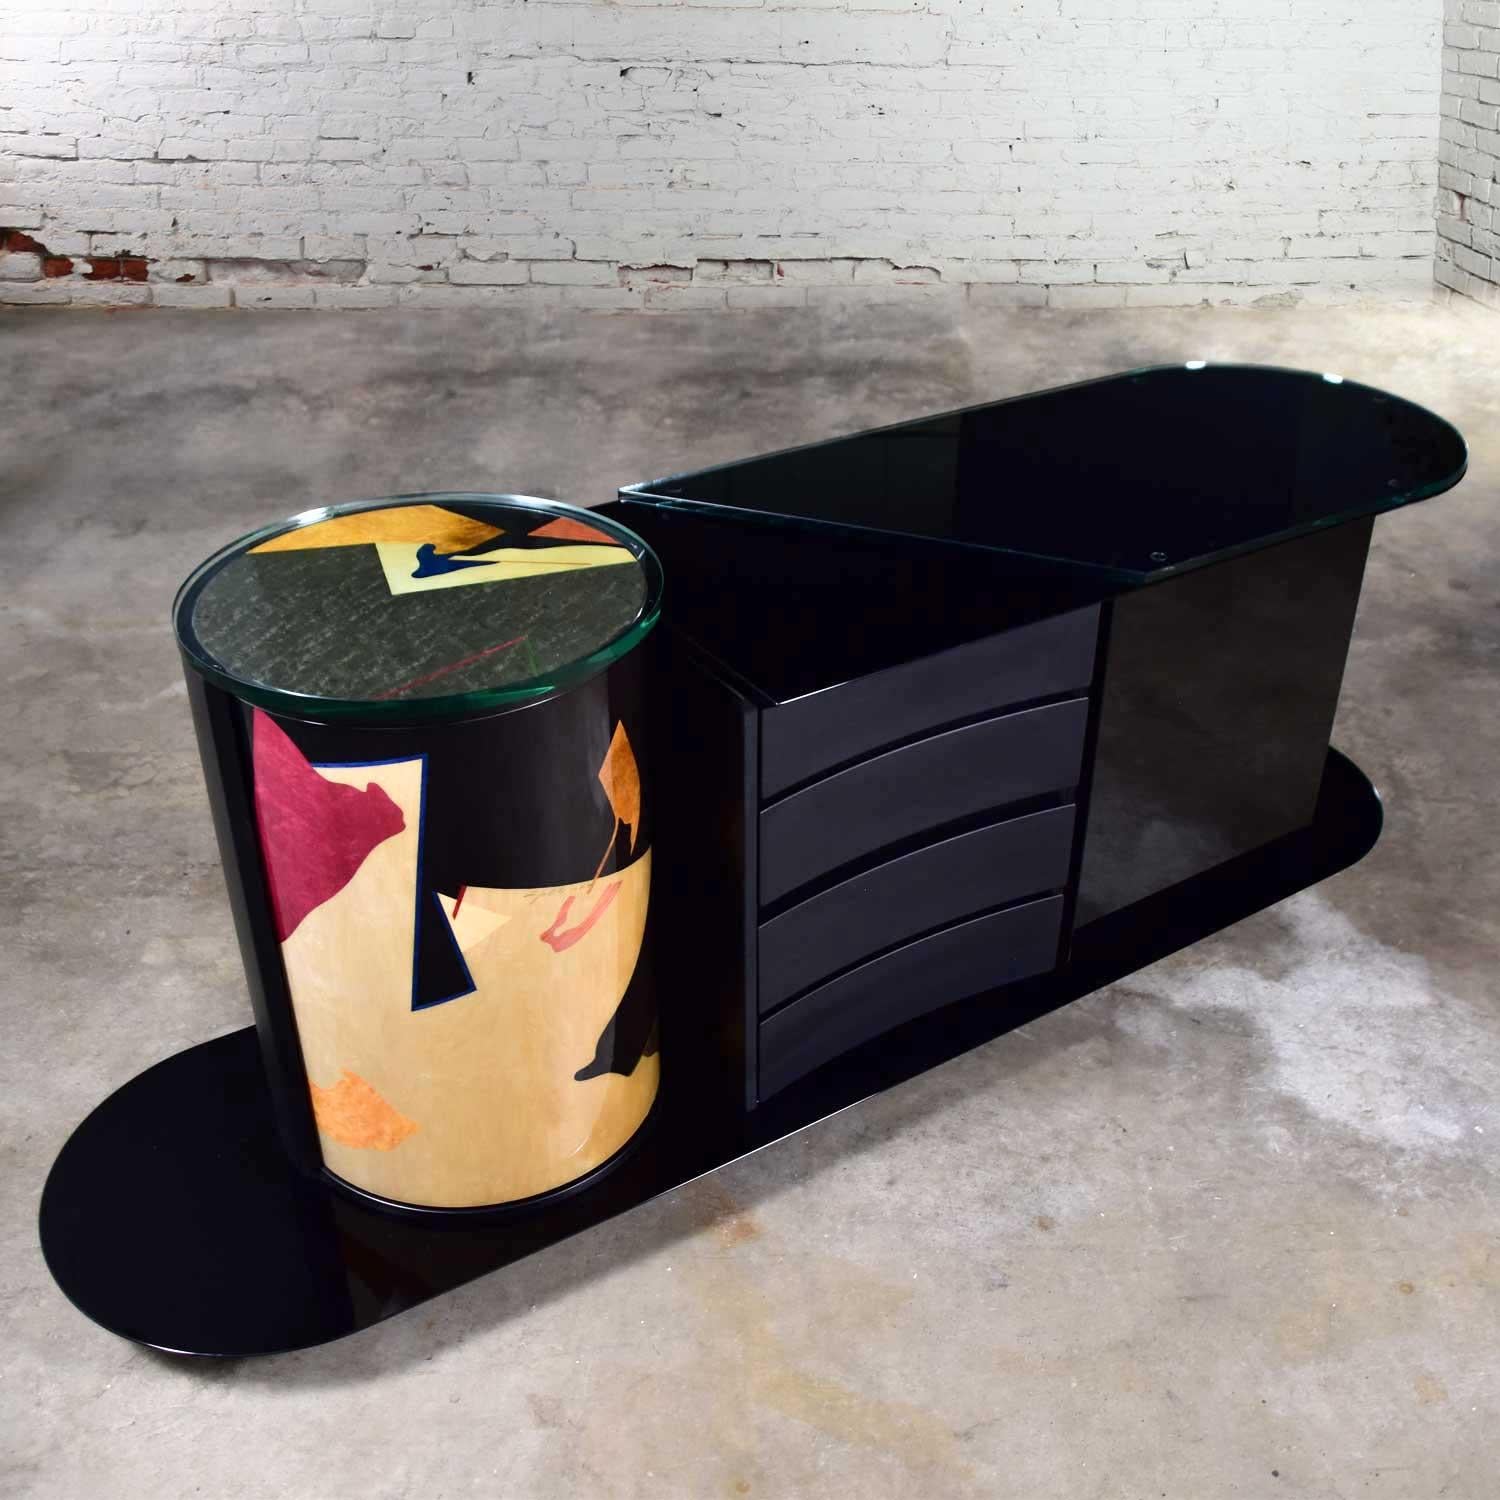 Stunning postmodern Italian black lacquered buffet, credenza, or sideboard signed by Pietro Costantini. Comprised of a highly lacquered black finish, cylinder shaped unit on one side with abstract geometrical designs in gold, green, red, blue, and